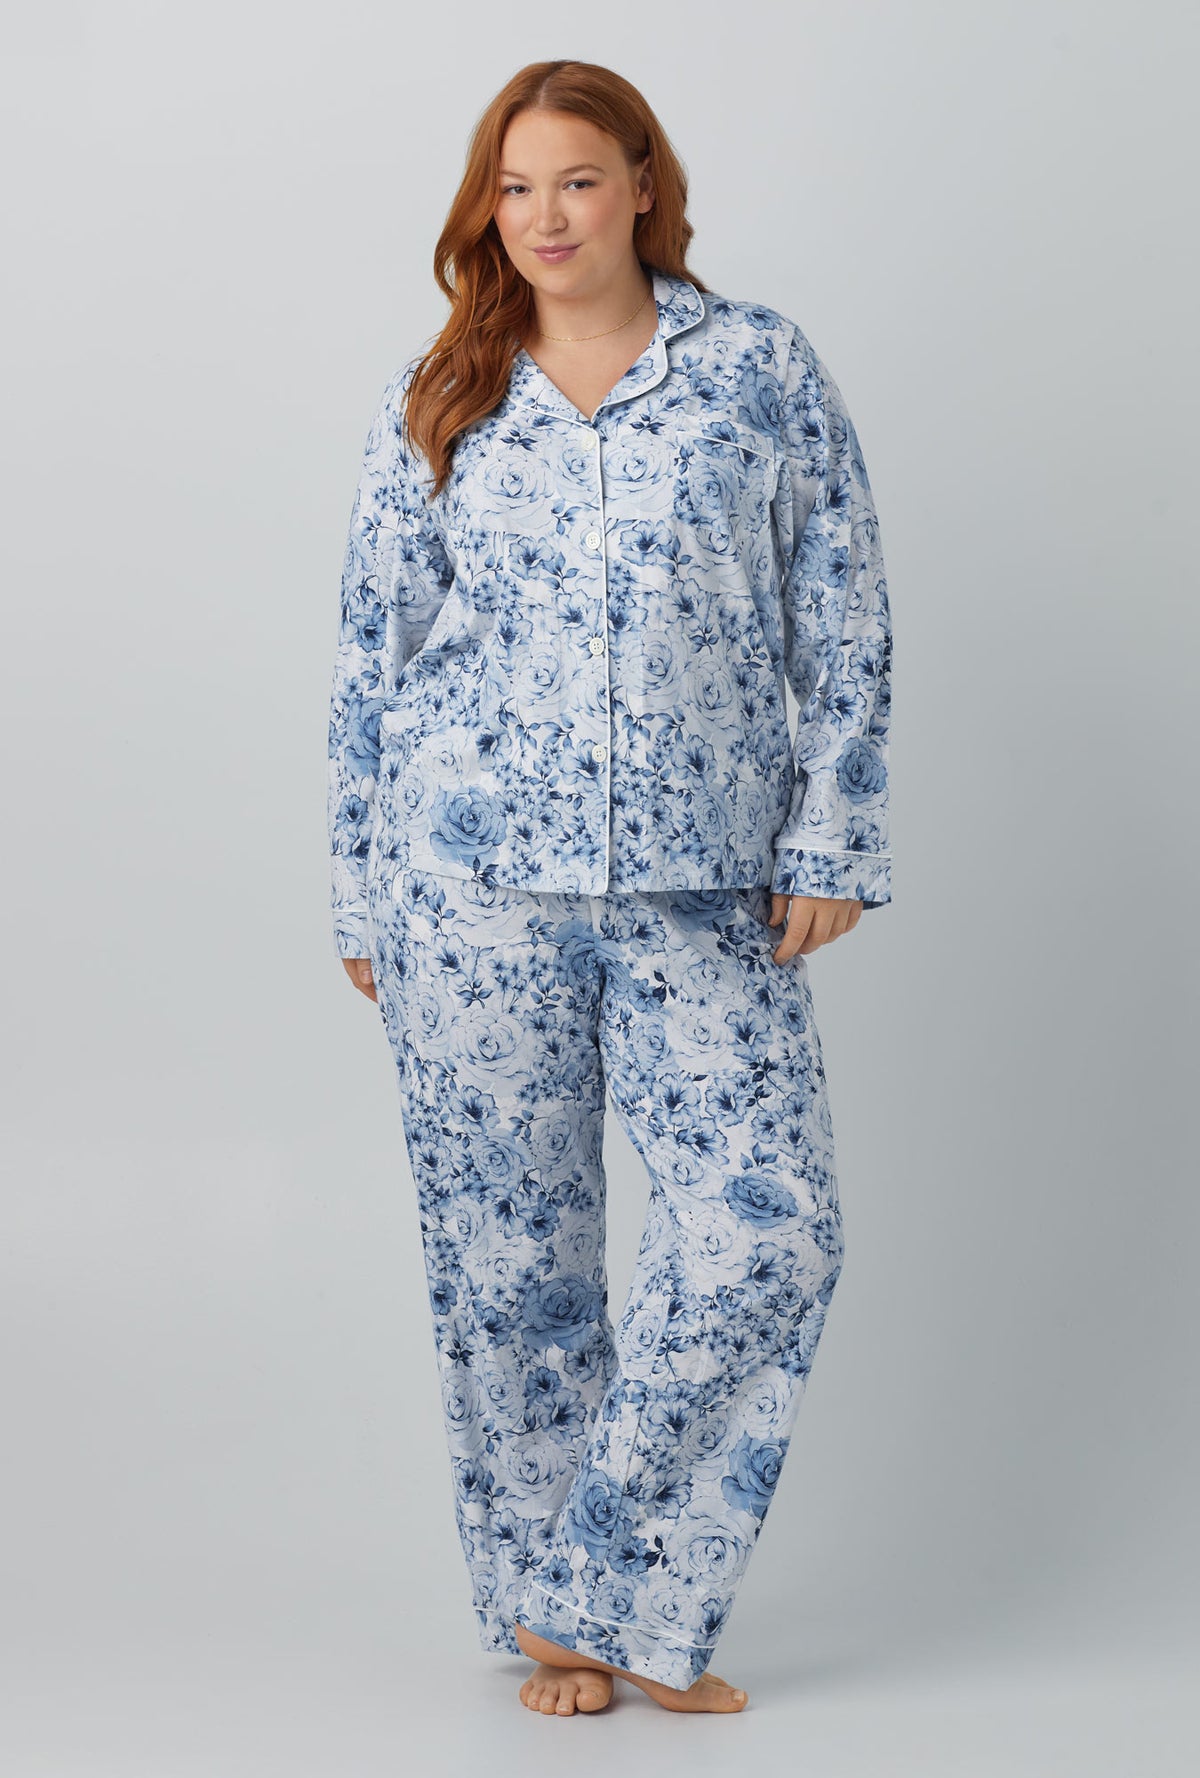 A lady wearing blue long sleeve classic stretch jersey cropped pj set with eternal blooms print.